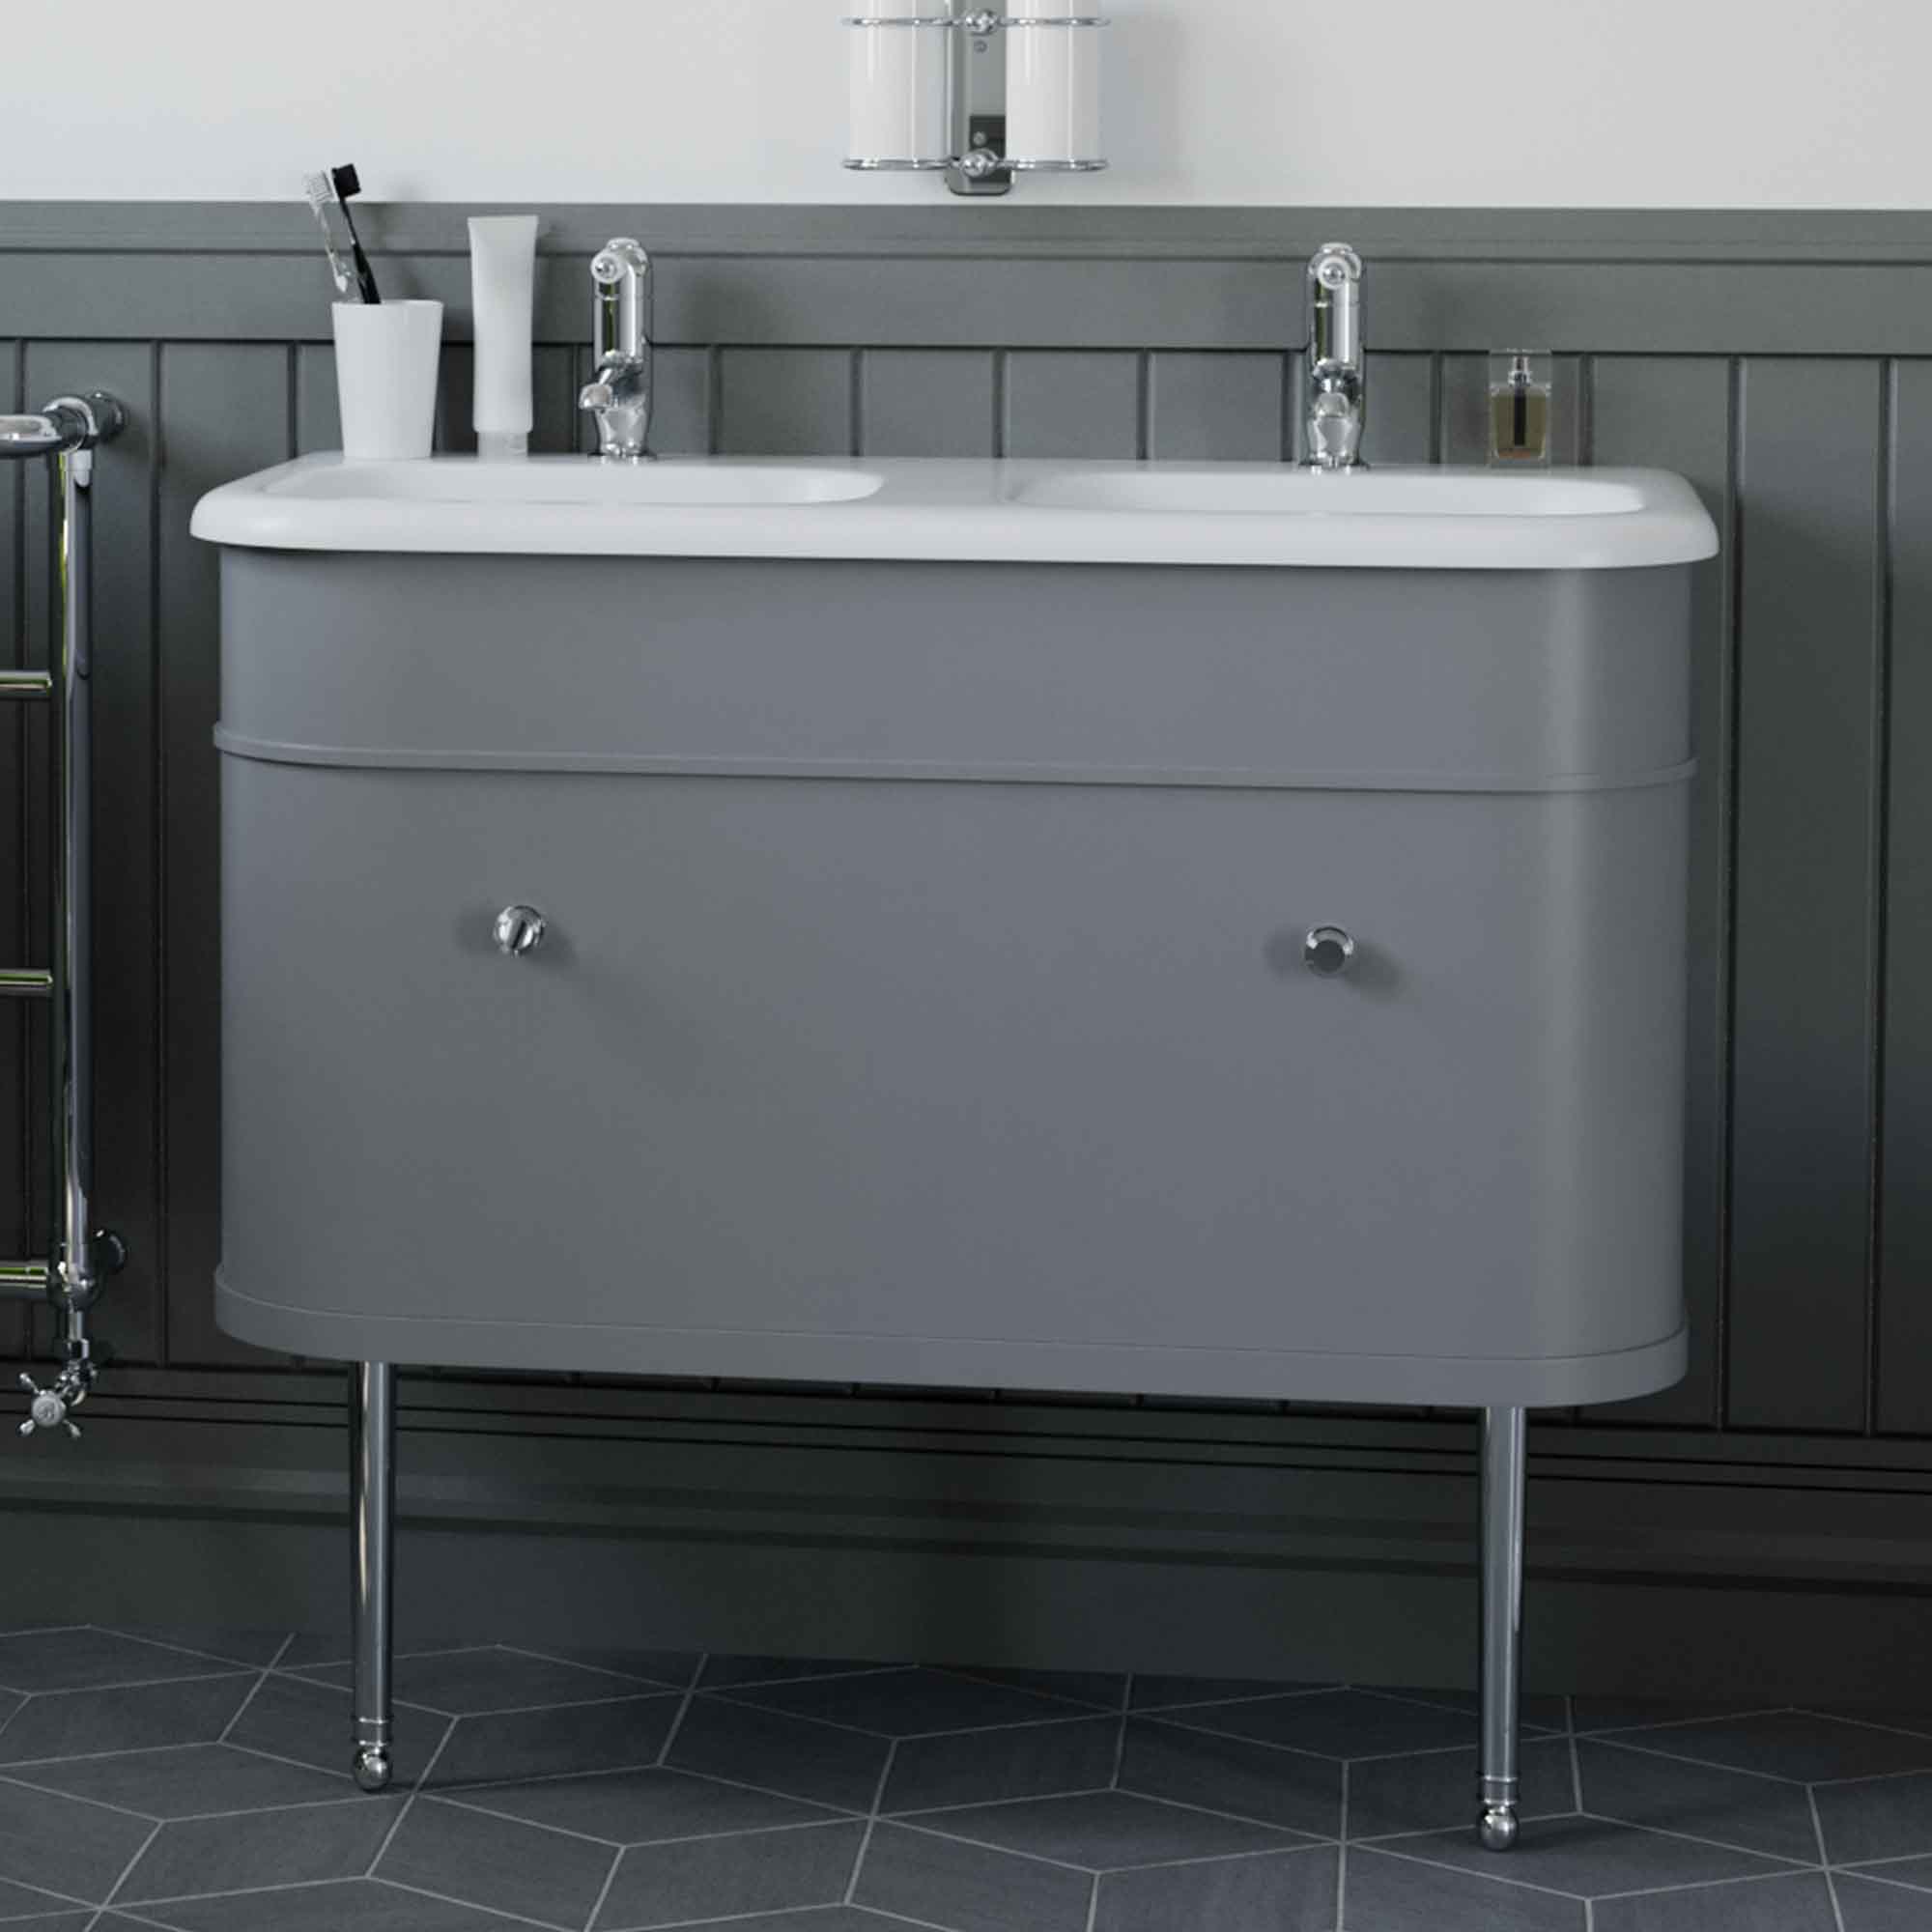 burlington chalfont 1000 wall mounted vanity unit with double roll top basin classic grey